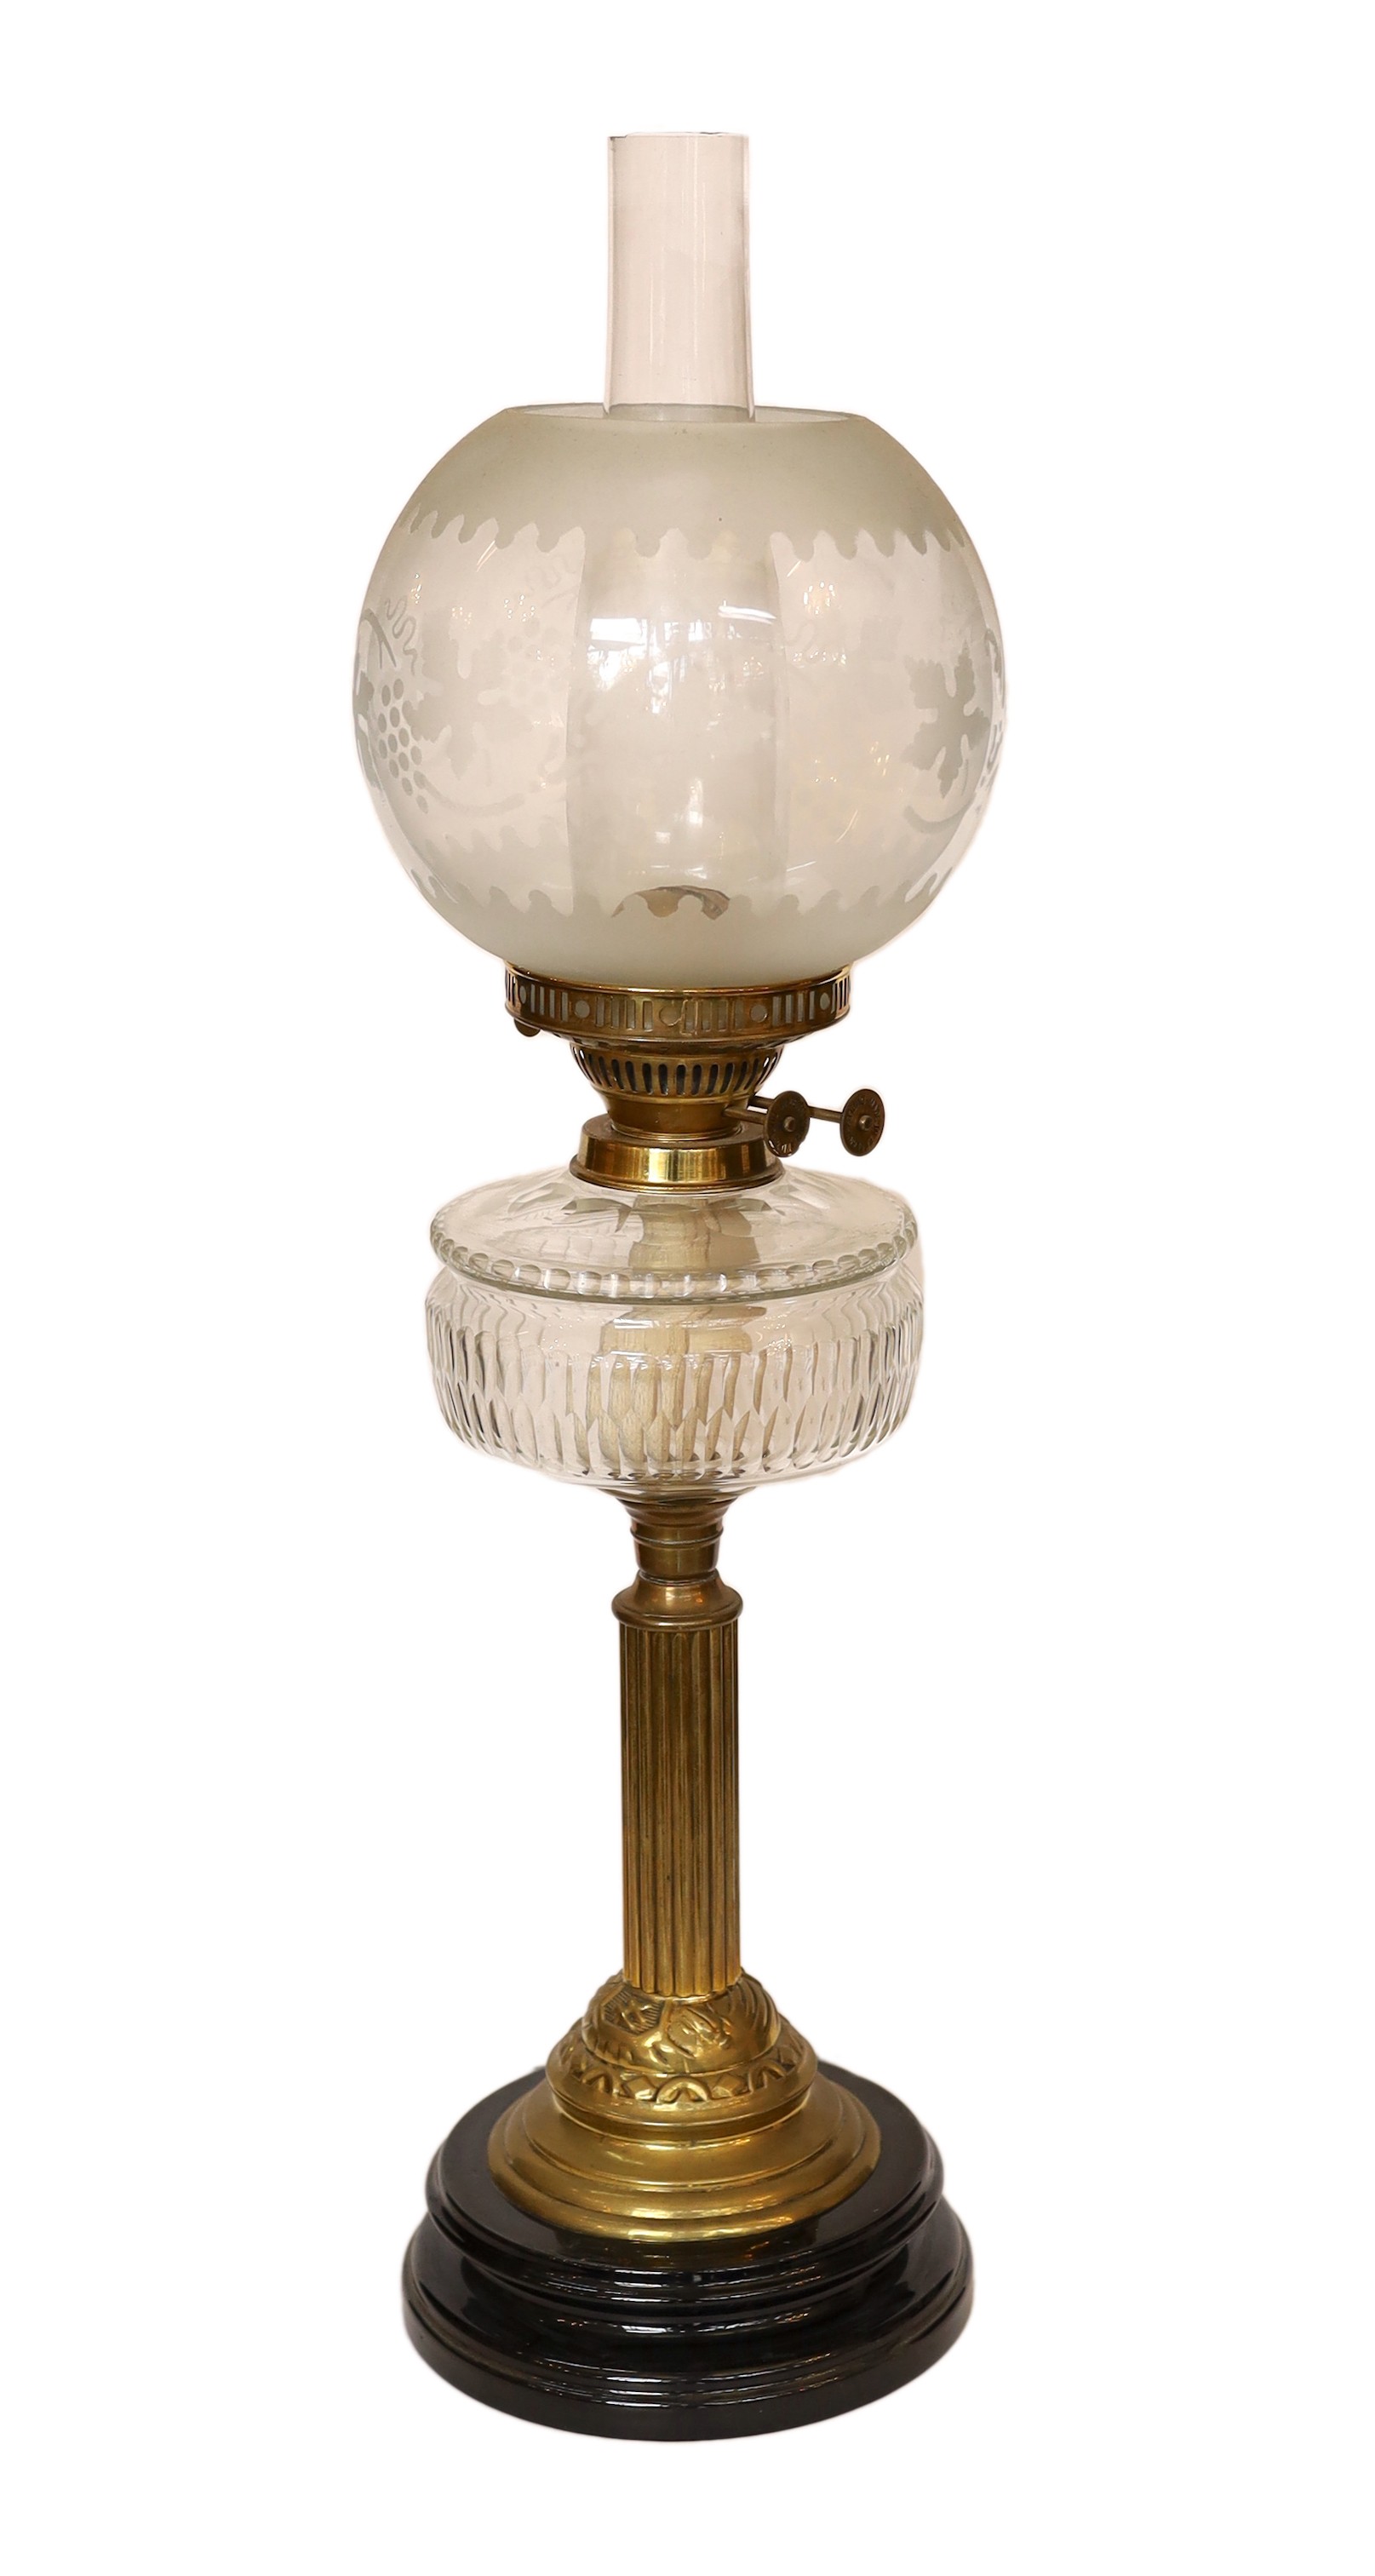 A late Victorian brass oil lamp with cut glass reservoir, duplex mechanism, etched glass globe and flue, height overall 68cm